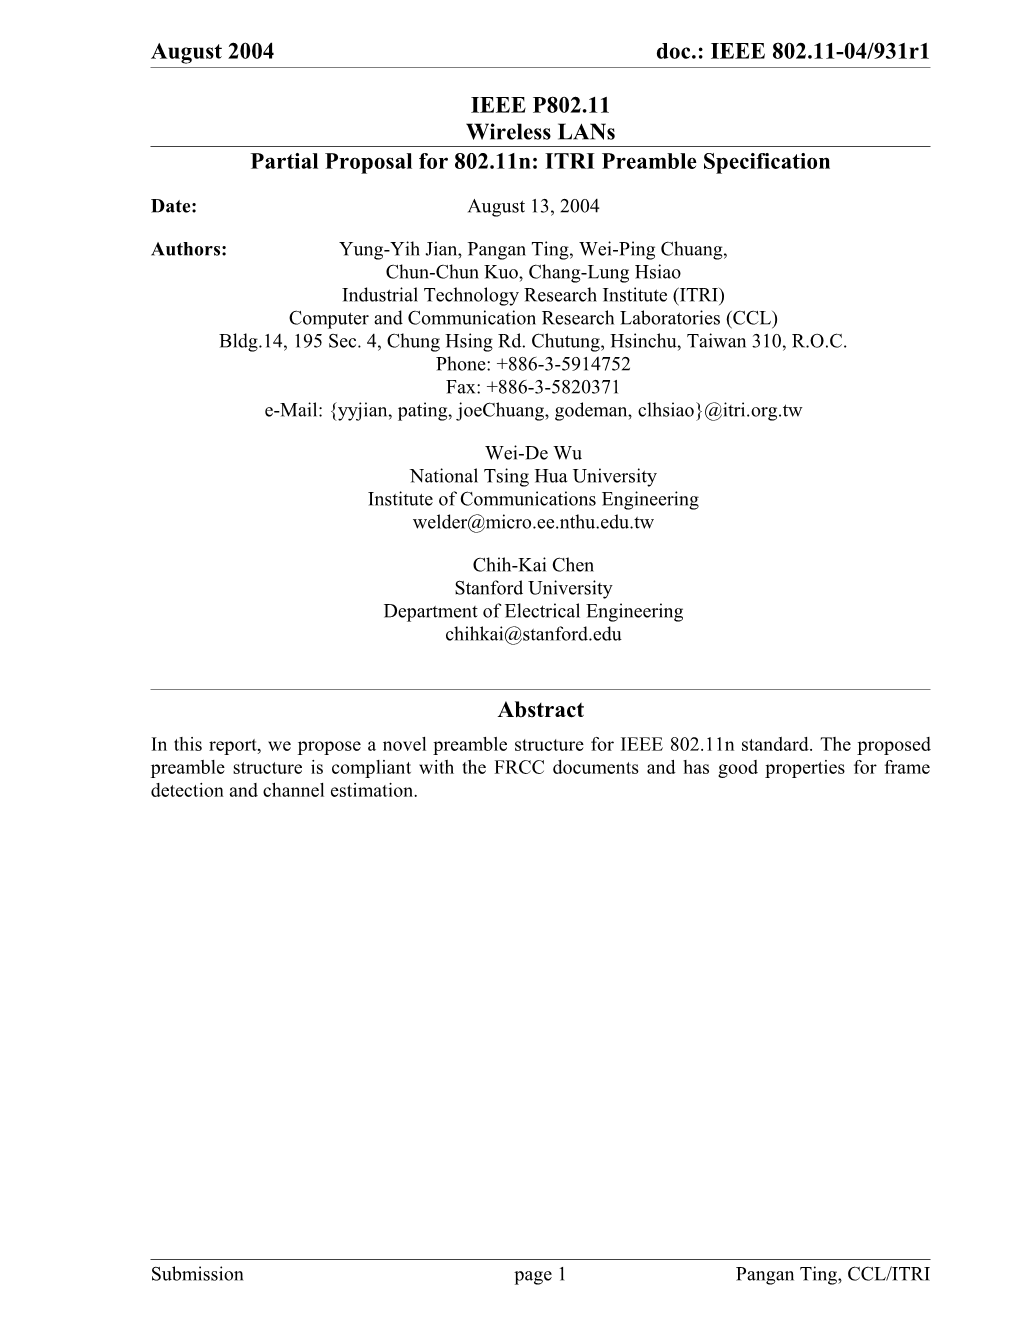 Partial Proposal for 802.11N: ITRI Preamble Specification